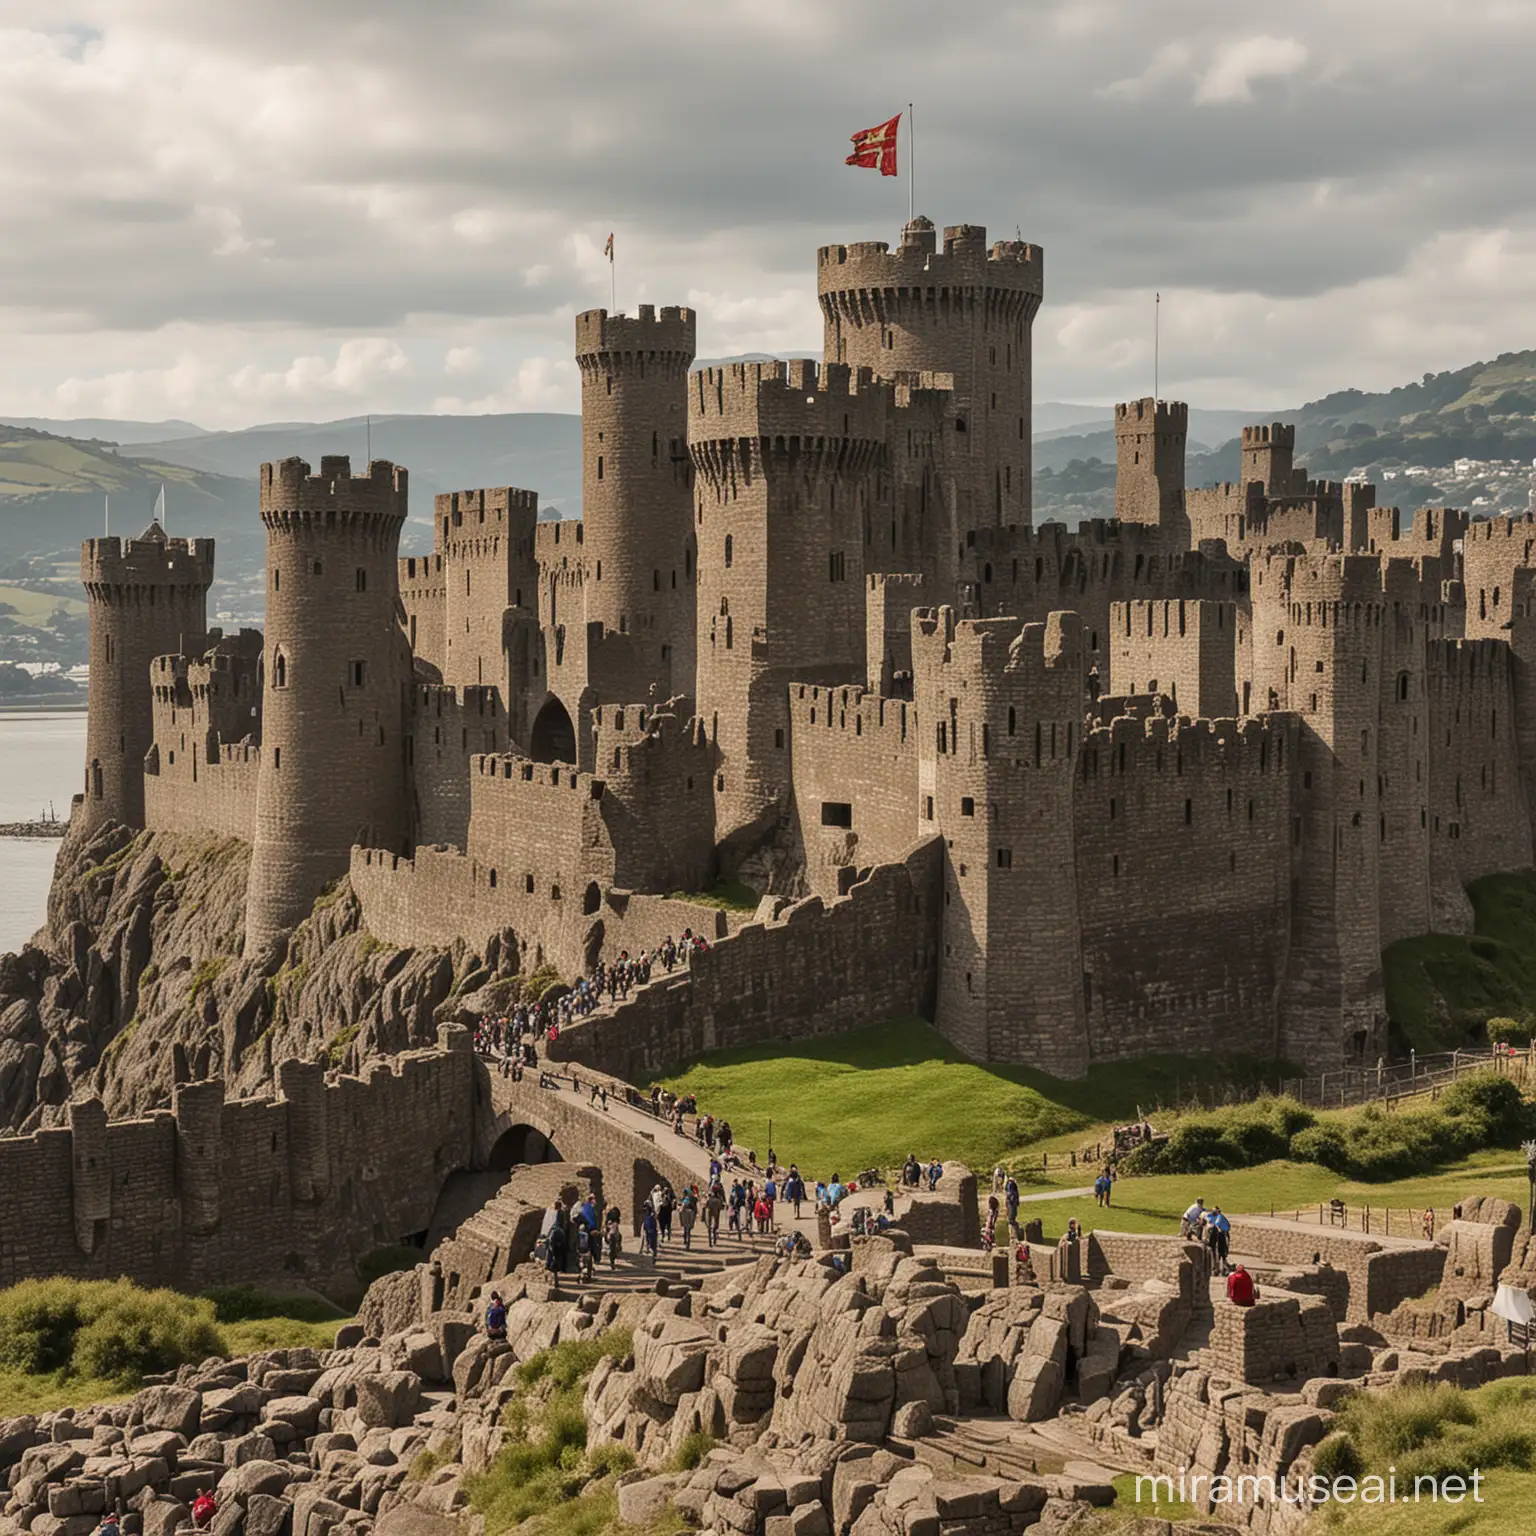 Conwy castle in medieval times